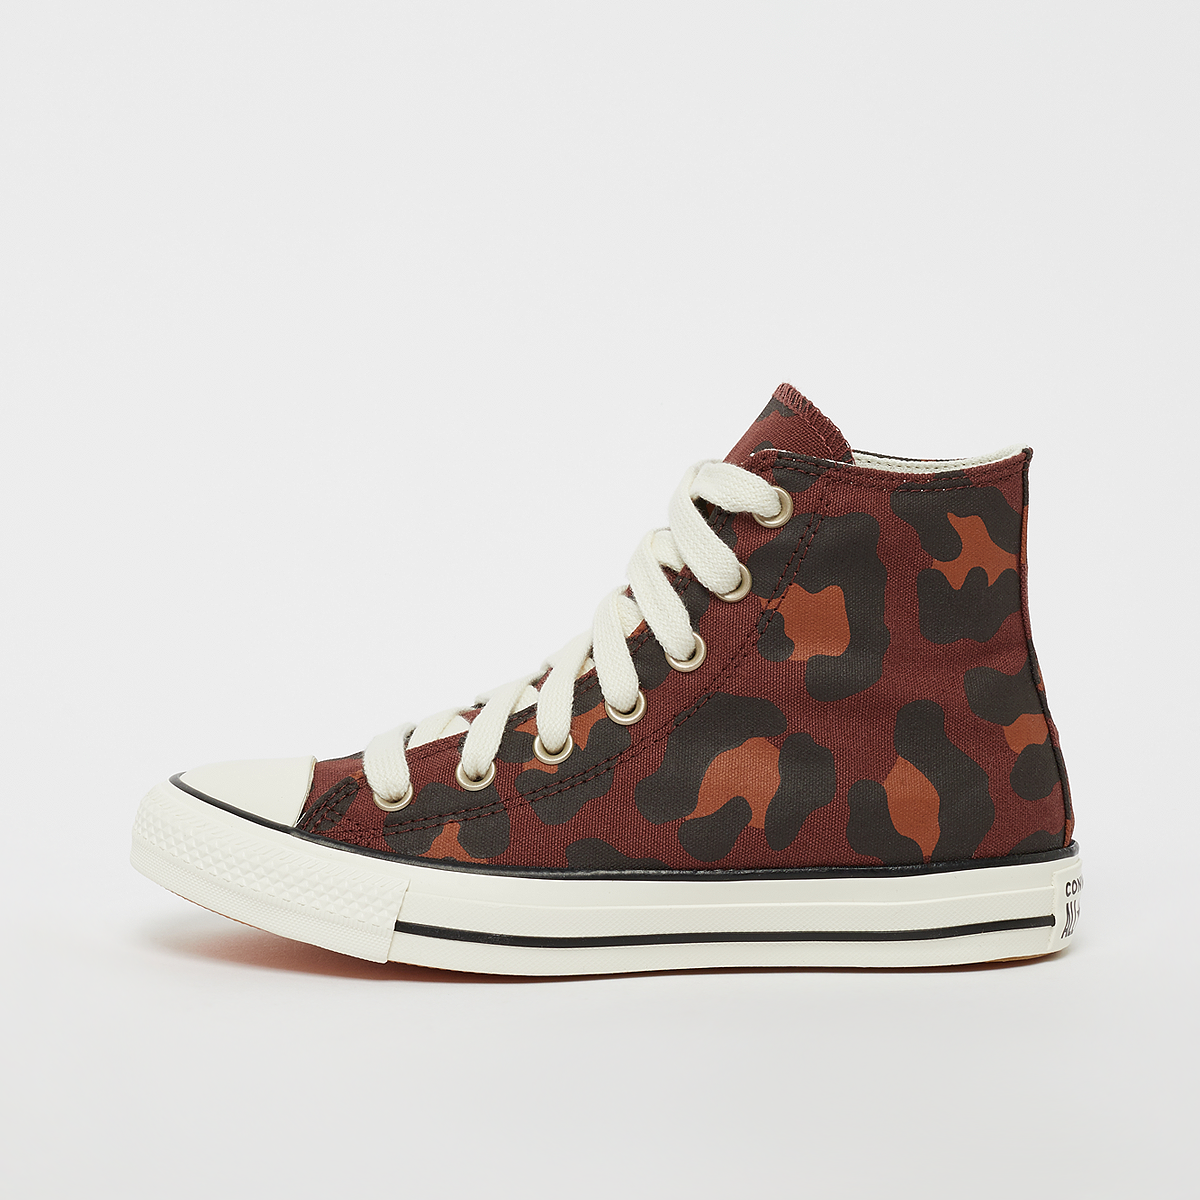 Chuck Taylor All Star, Converse, Footwear, brown/egret/gold, taille: 39